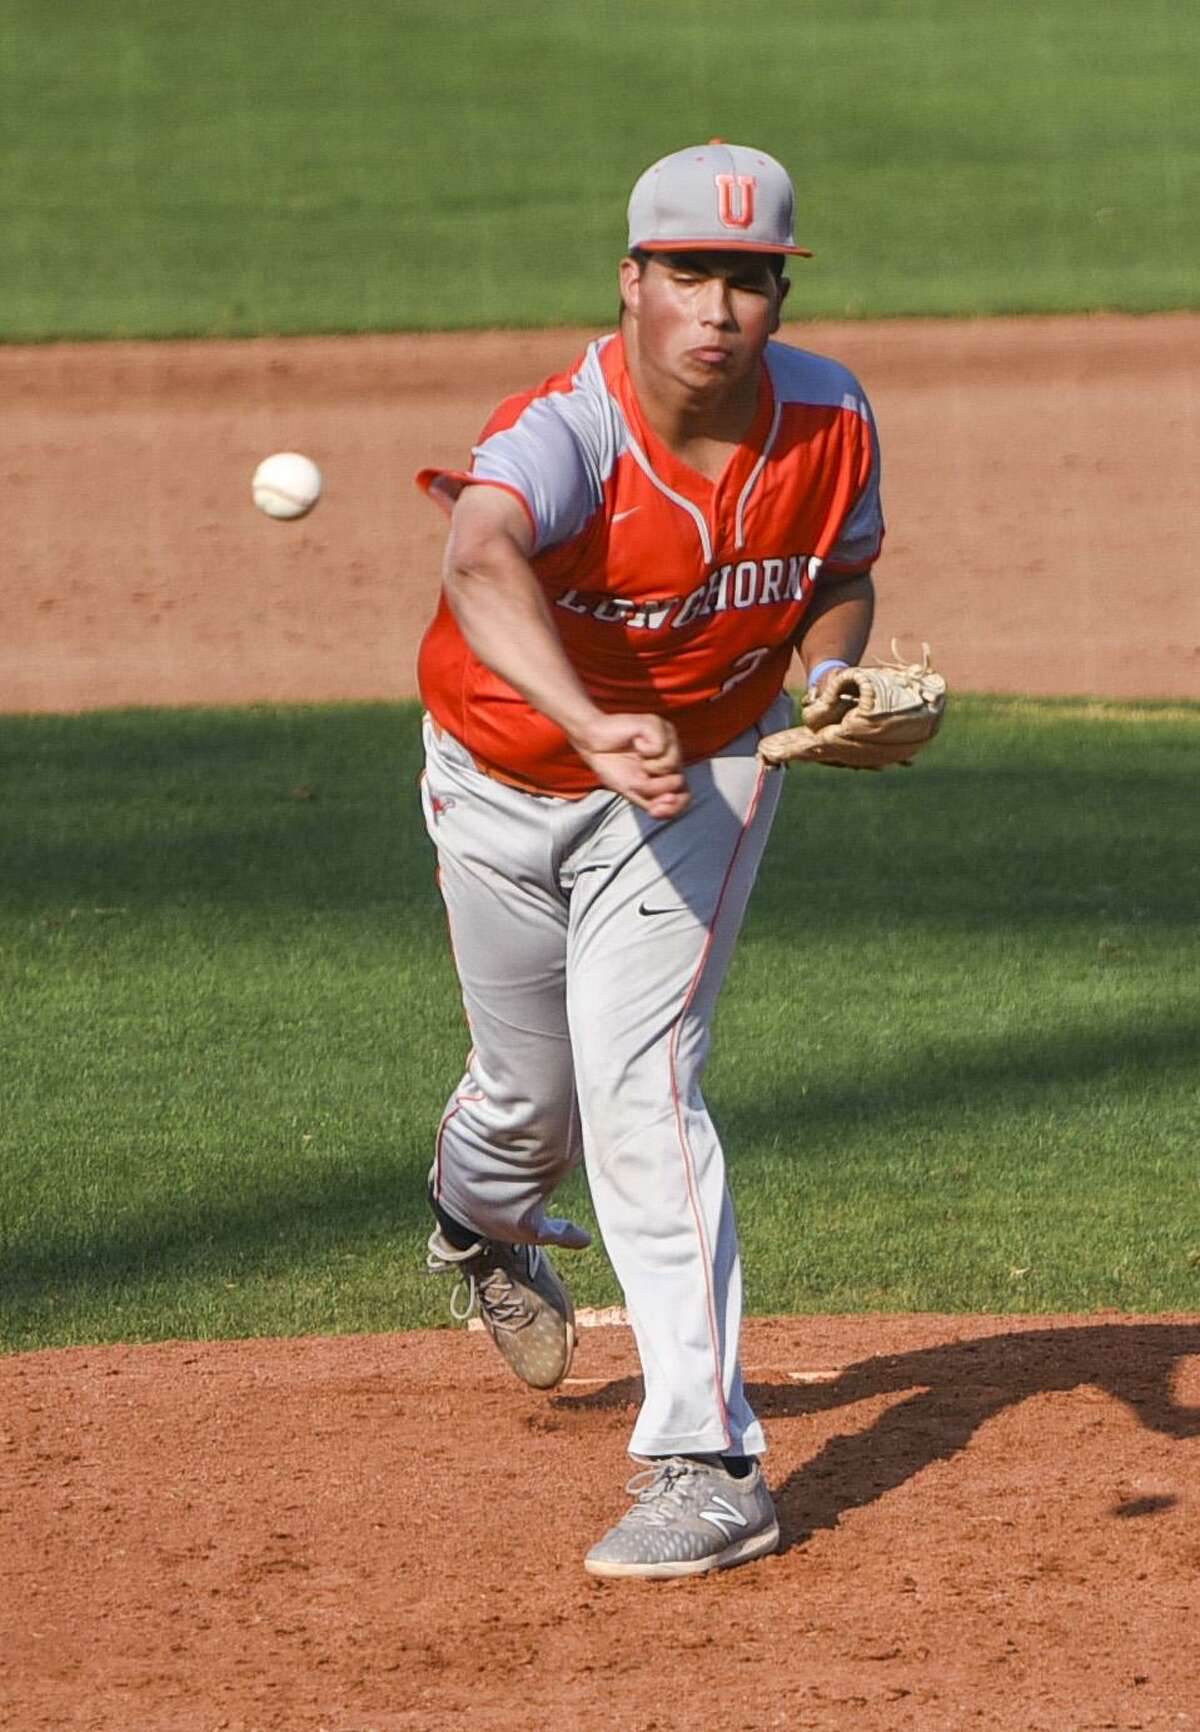 Adrian Castillo took the loss Thursday allowing three earned runs in five innings as United fell 6-3 at McAllen to open the playoffs.